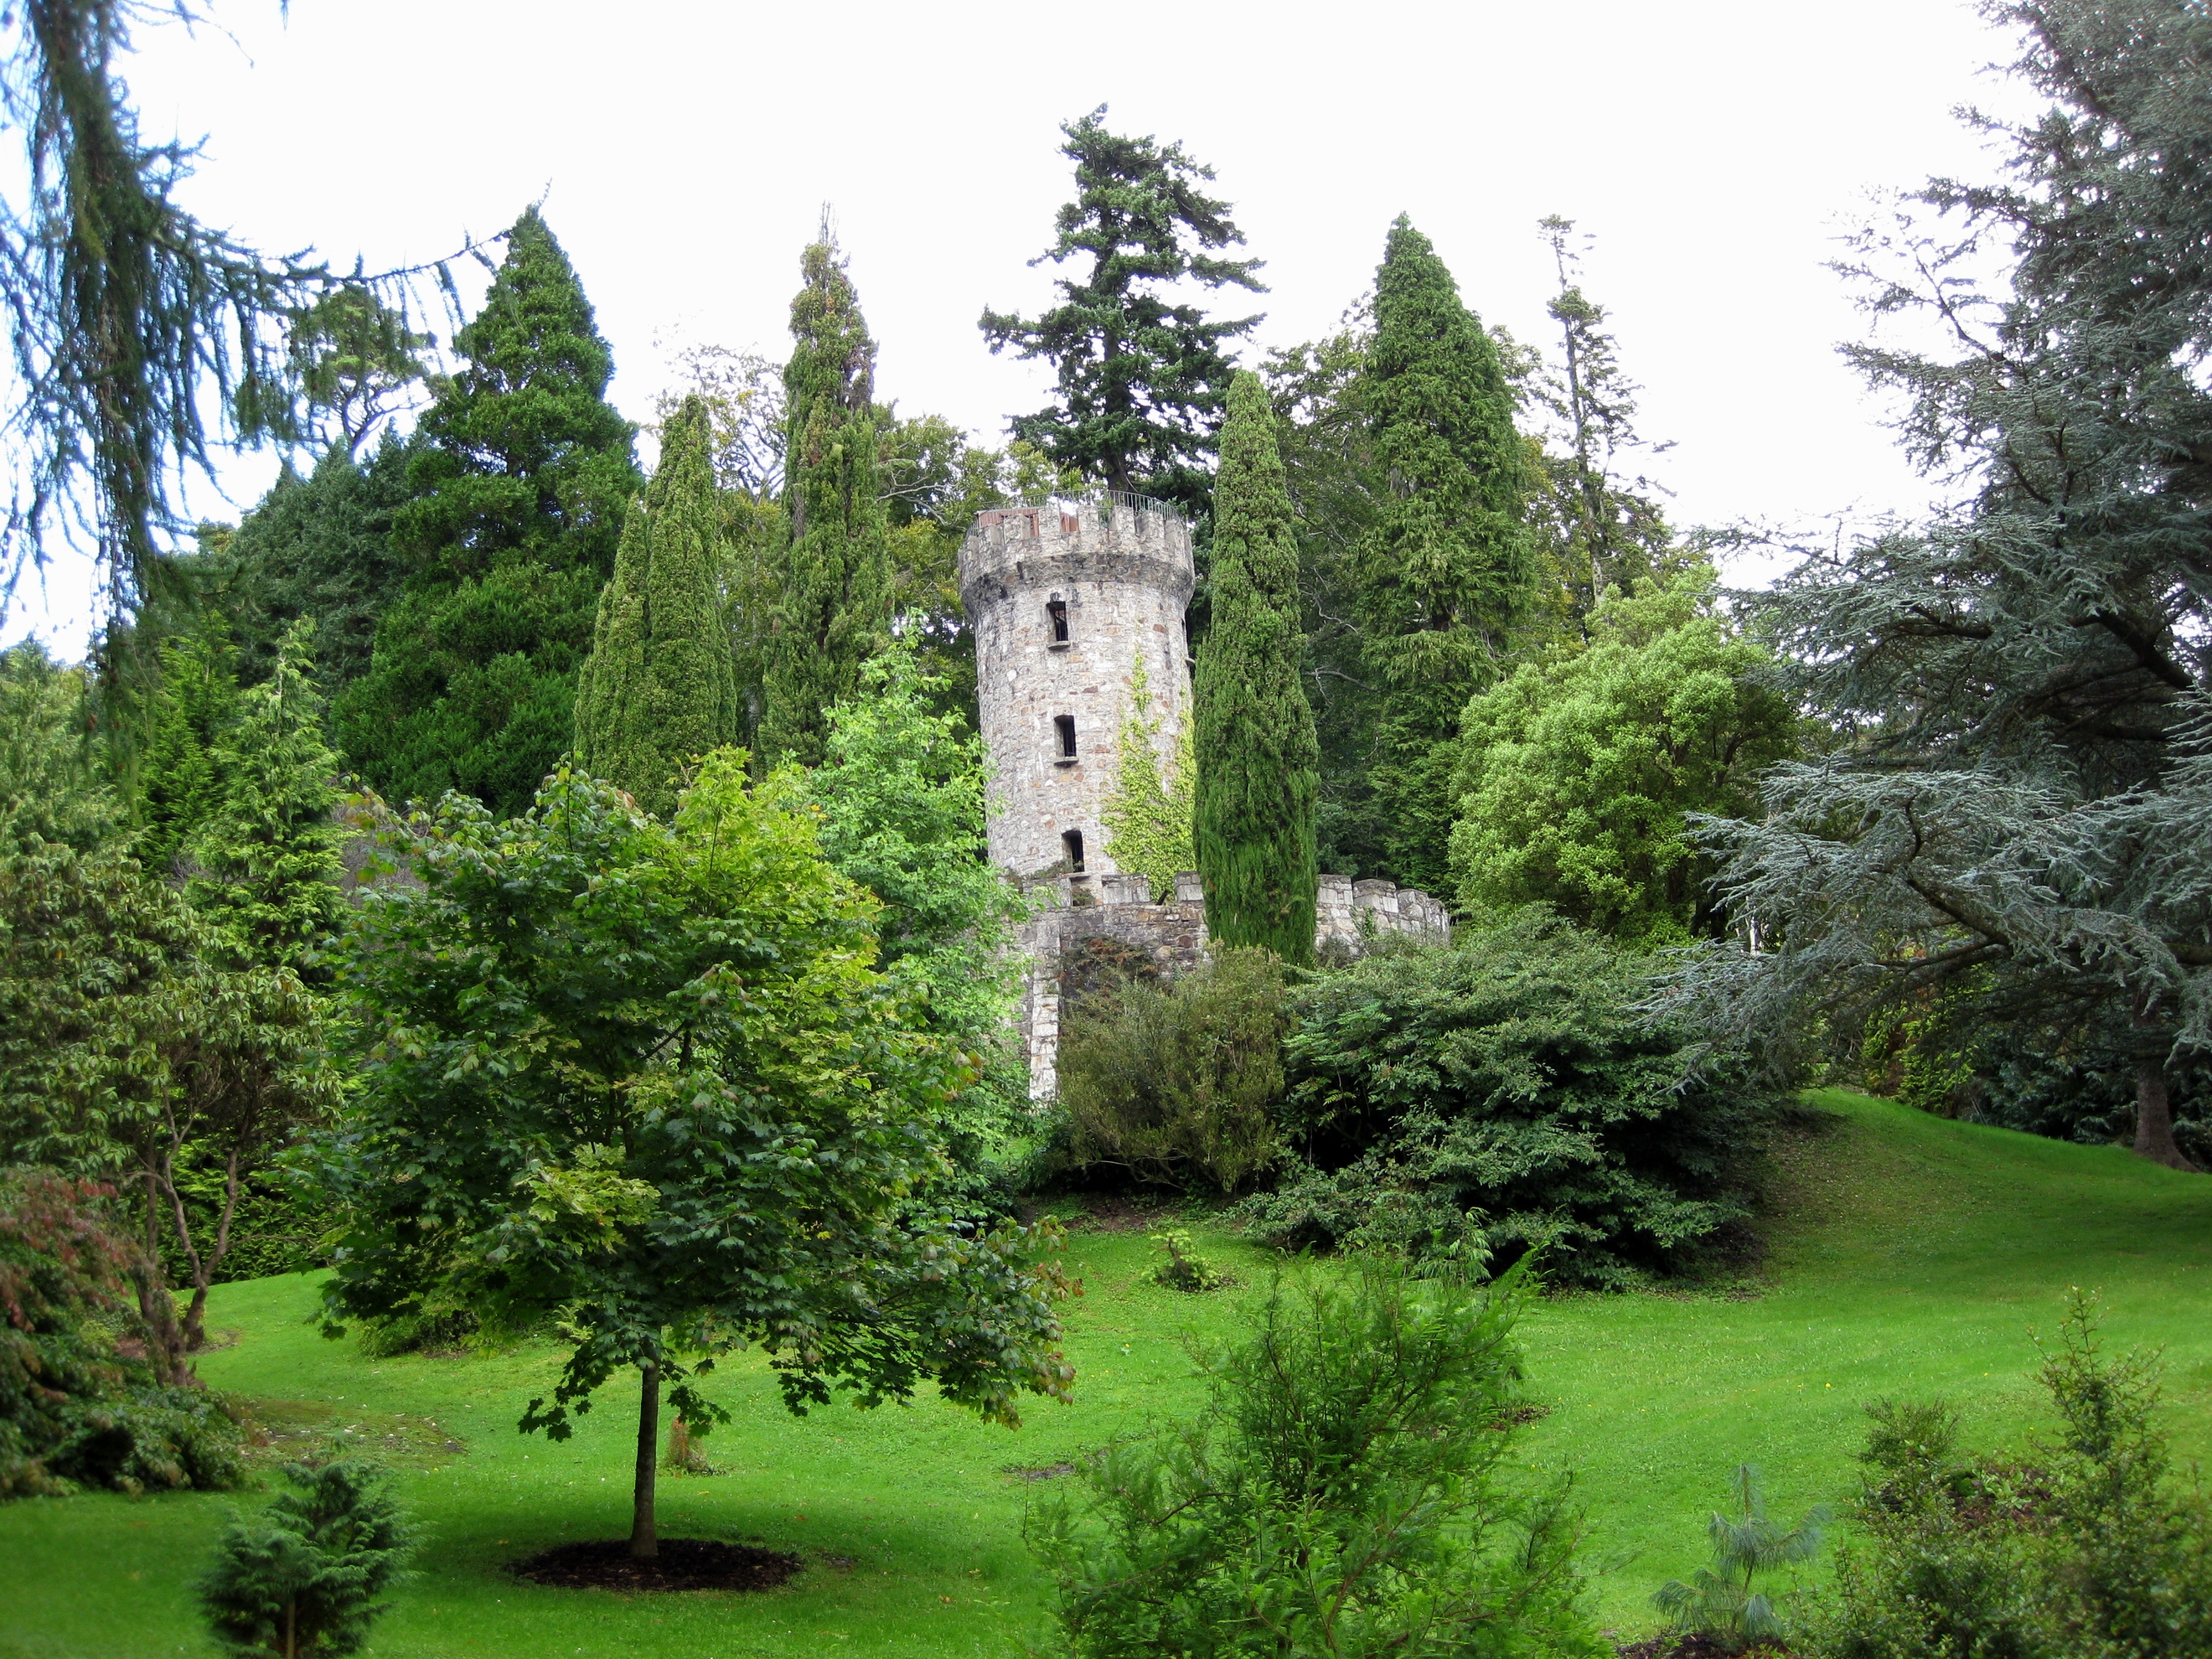 garden, nature, trees, lawn, tower